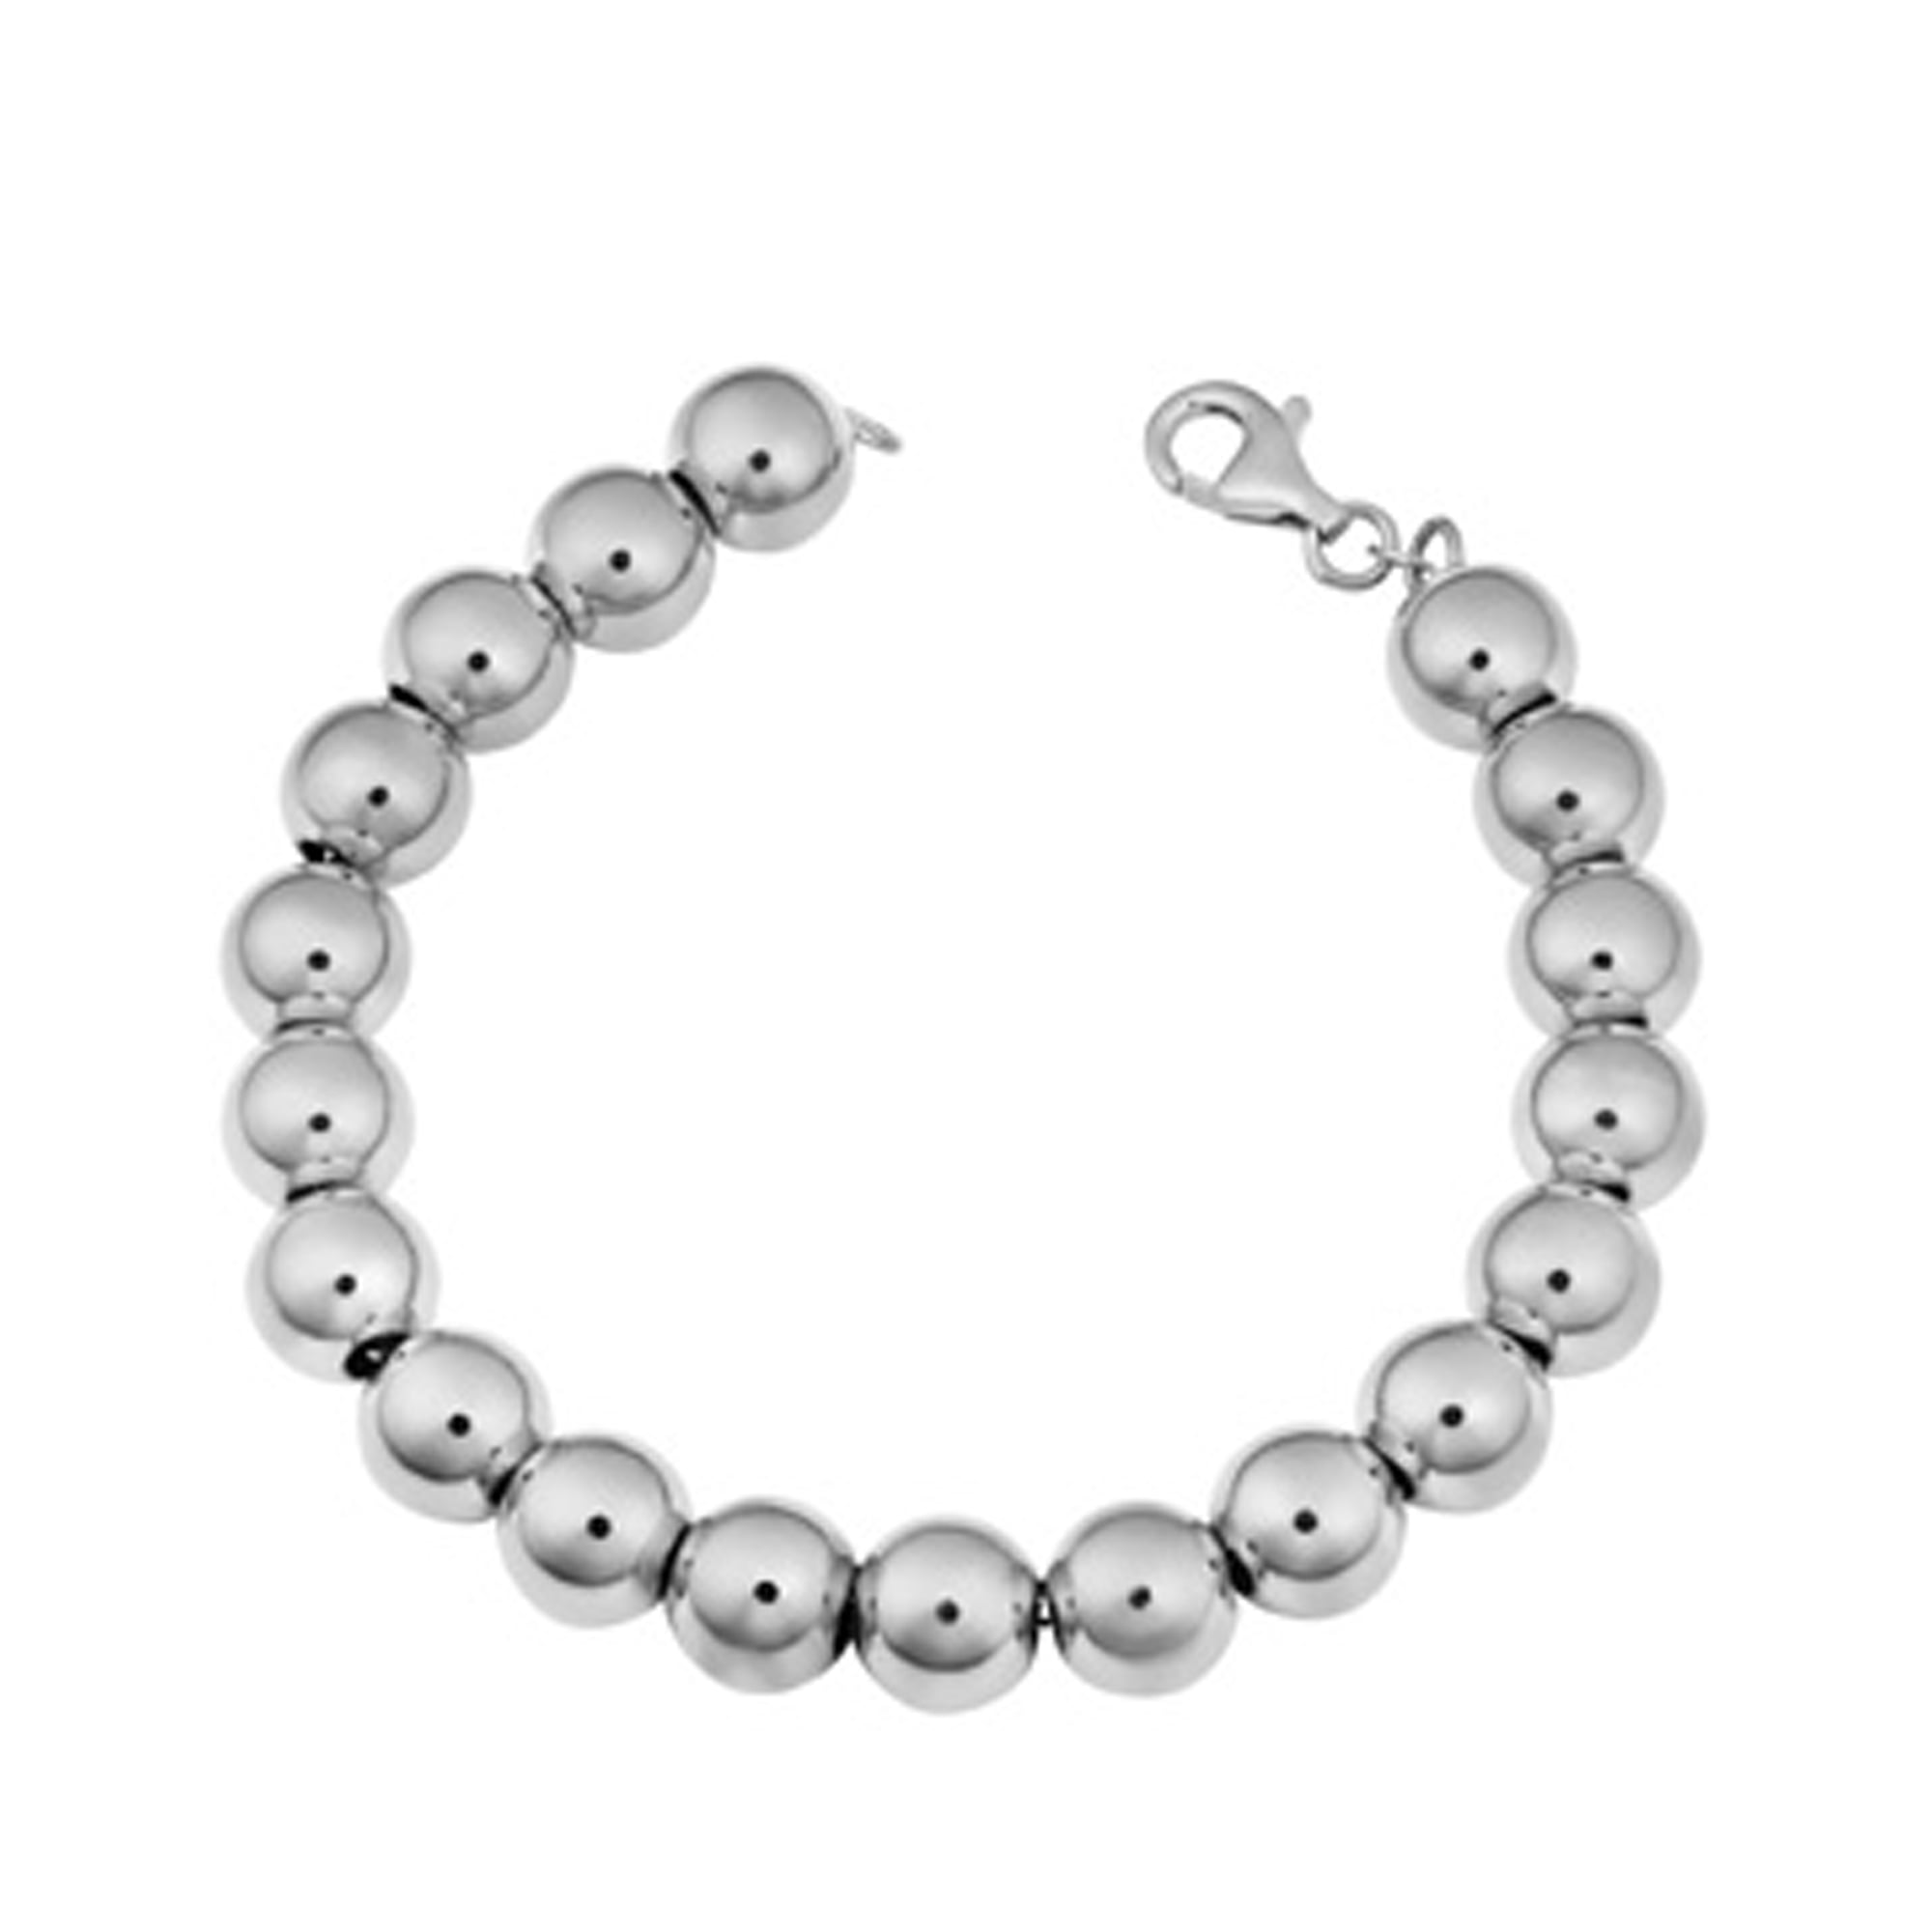 Jewelry Affairs - Sterling Silver 10mm Polished Ball Bracelet, 8